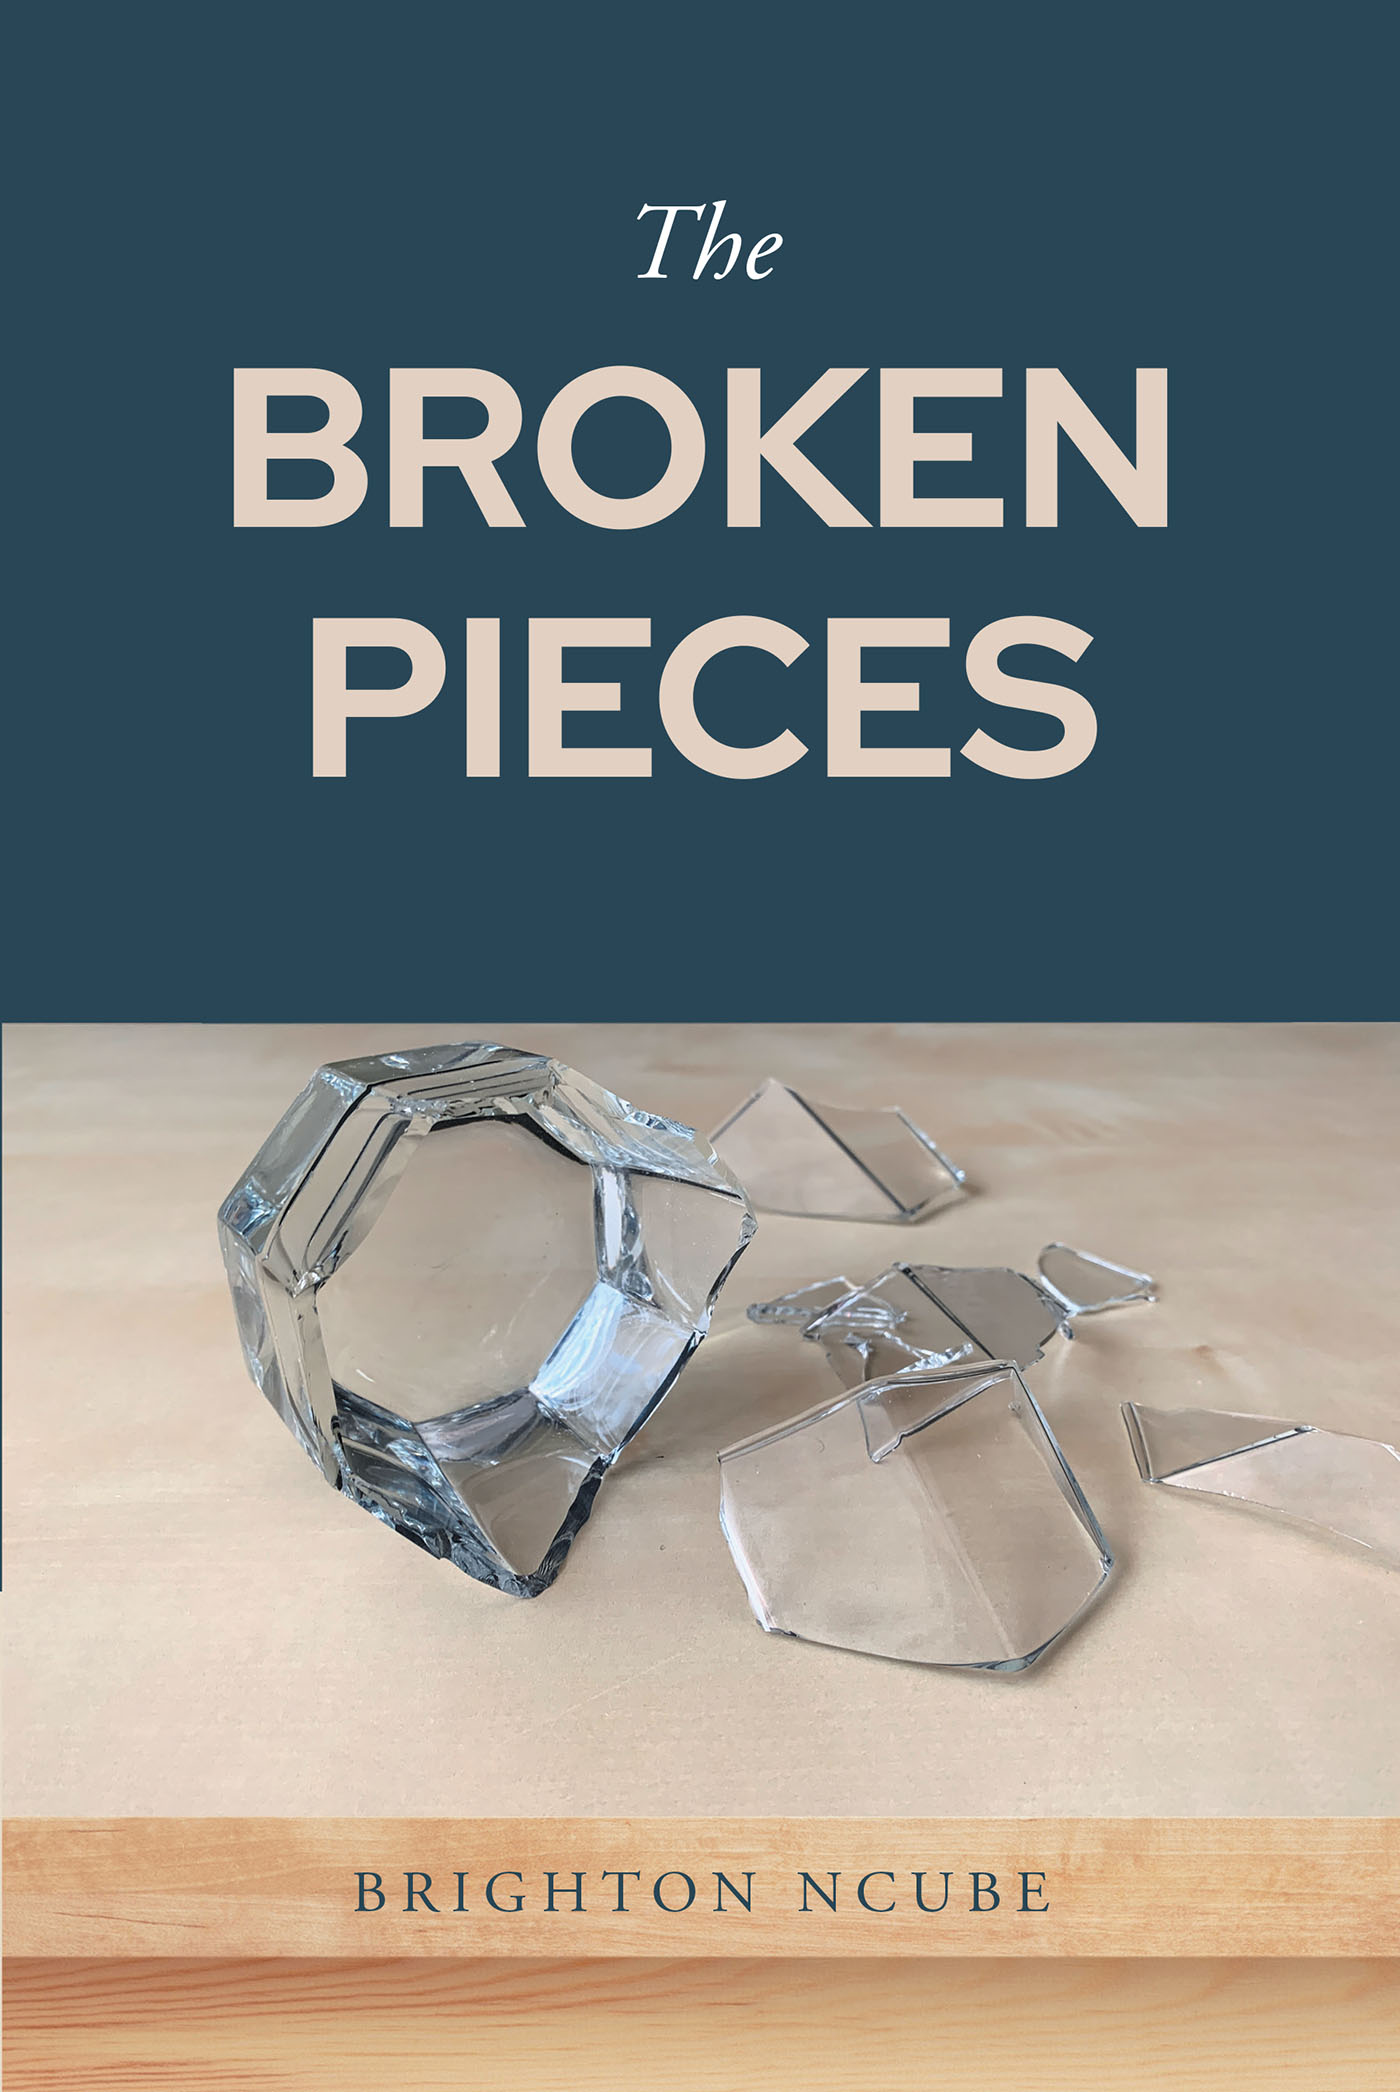 Author Brighton Ncube’s New Book, "The Broken Pieces," Explores How the Author’s Life Has Led Him to a Lasting Relationship with God Through His Steadfast Faith